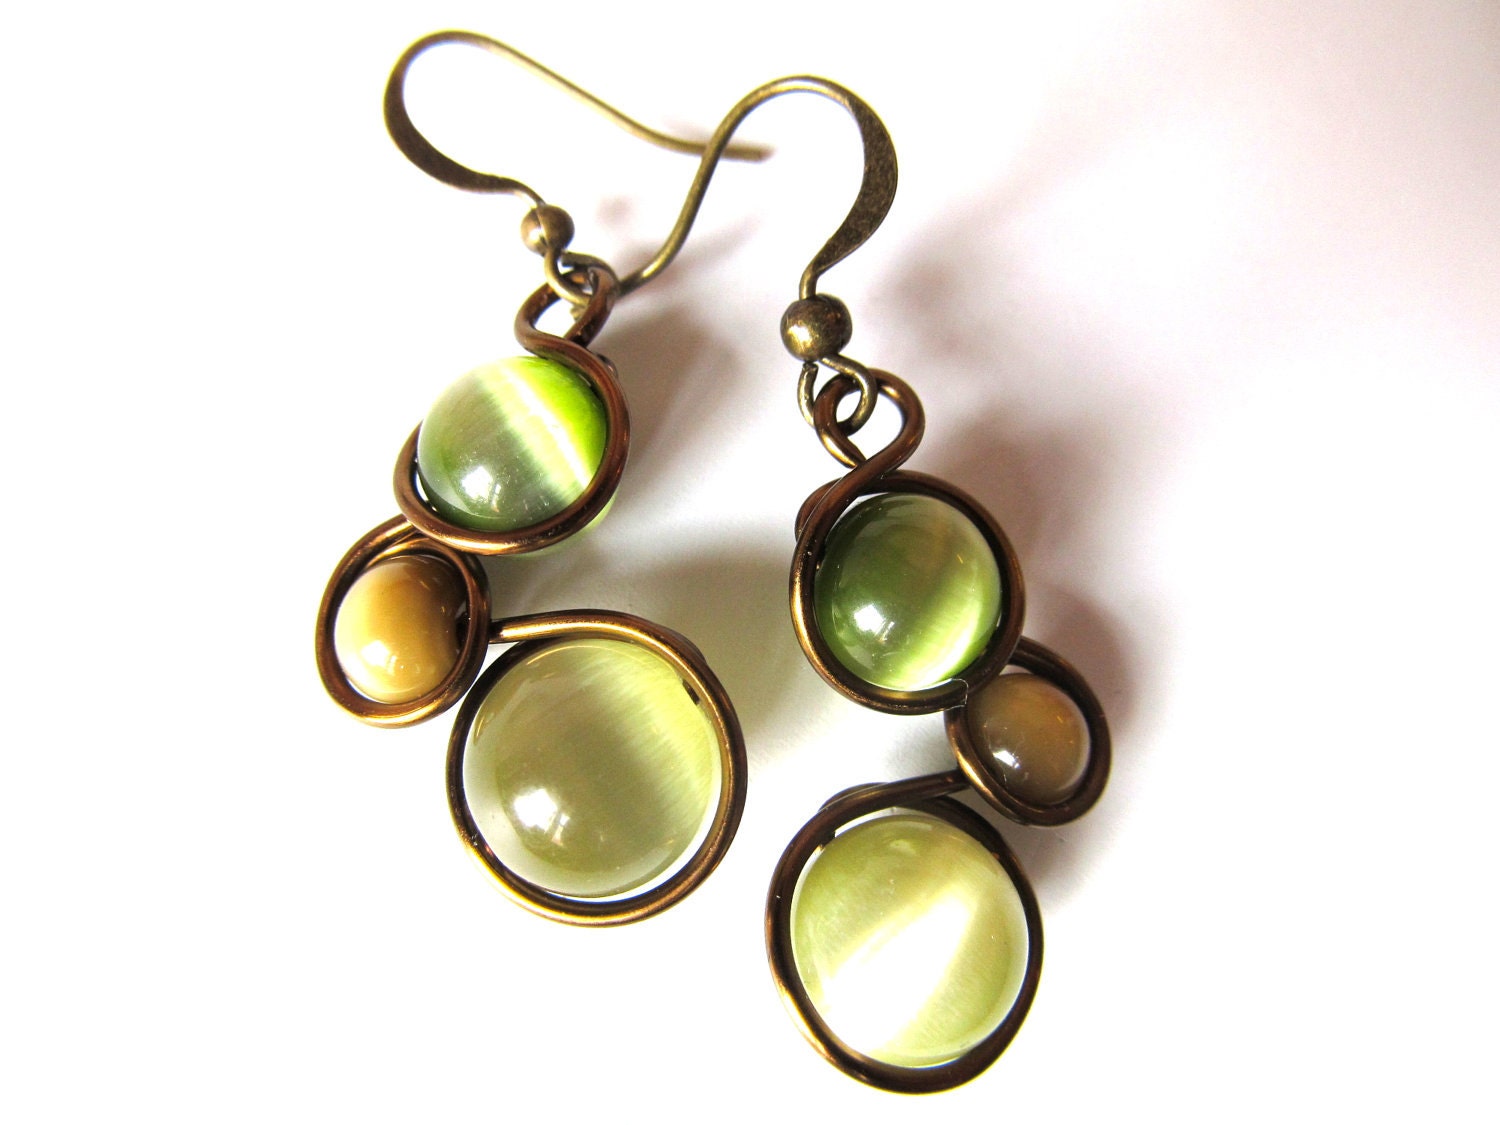 Khaki, Moss Green and Mocha Cat's Eye Earrings Wrapped with Antique Bronze Craft Wire - CarrieEastwood